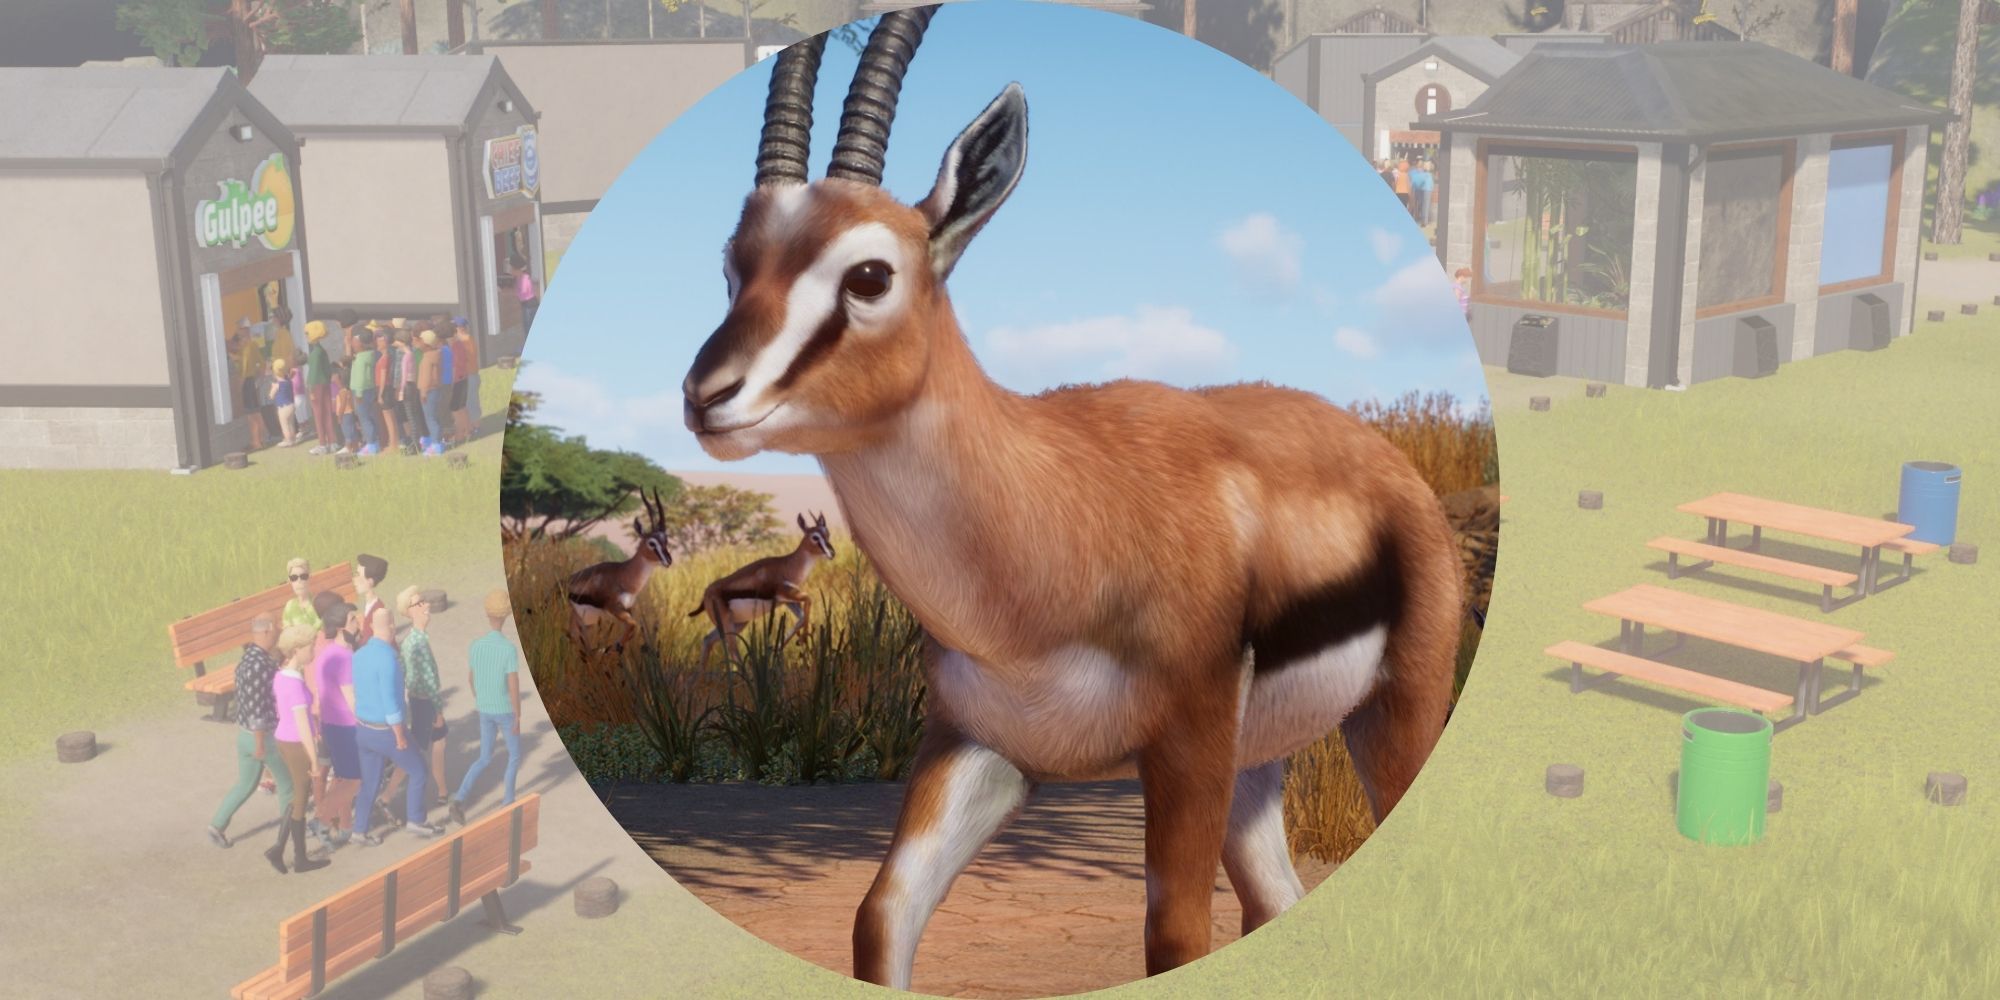 Planet Zoo Header Thompsons Gazelle in front of zoo